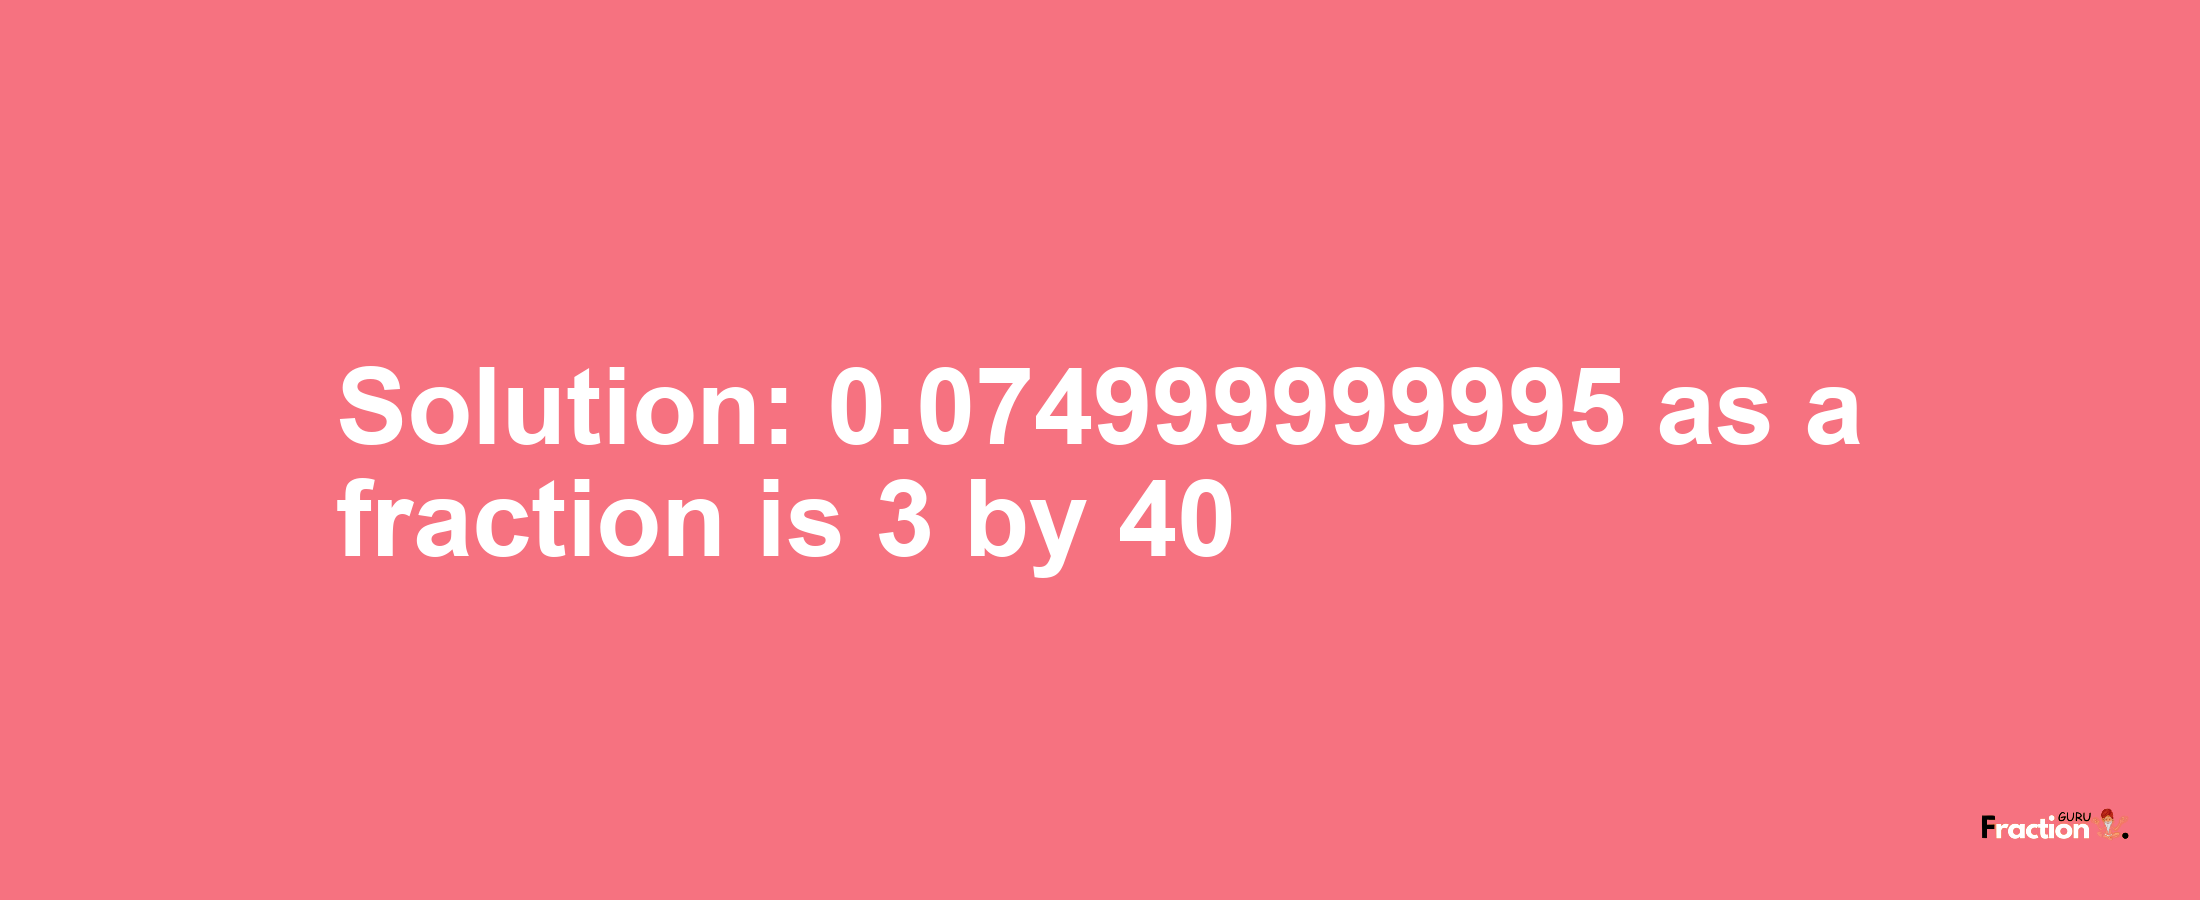 Solution:0.074999999995 as a fraction is 3/40